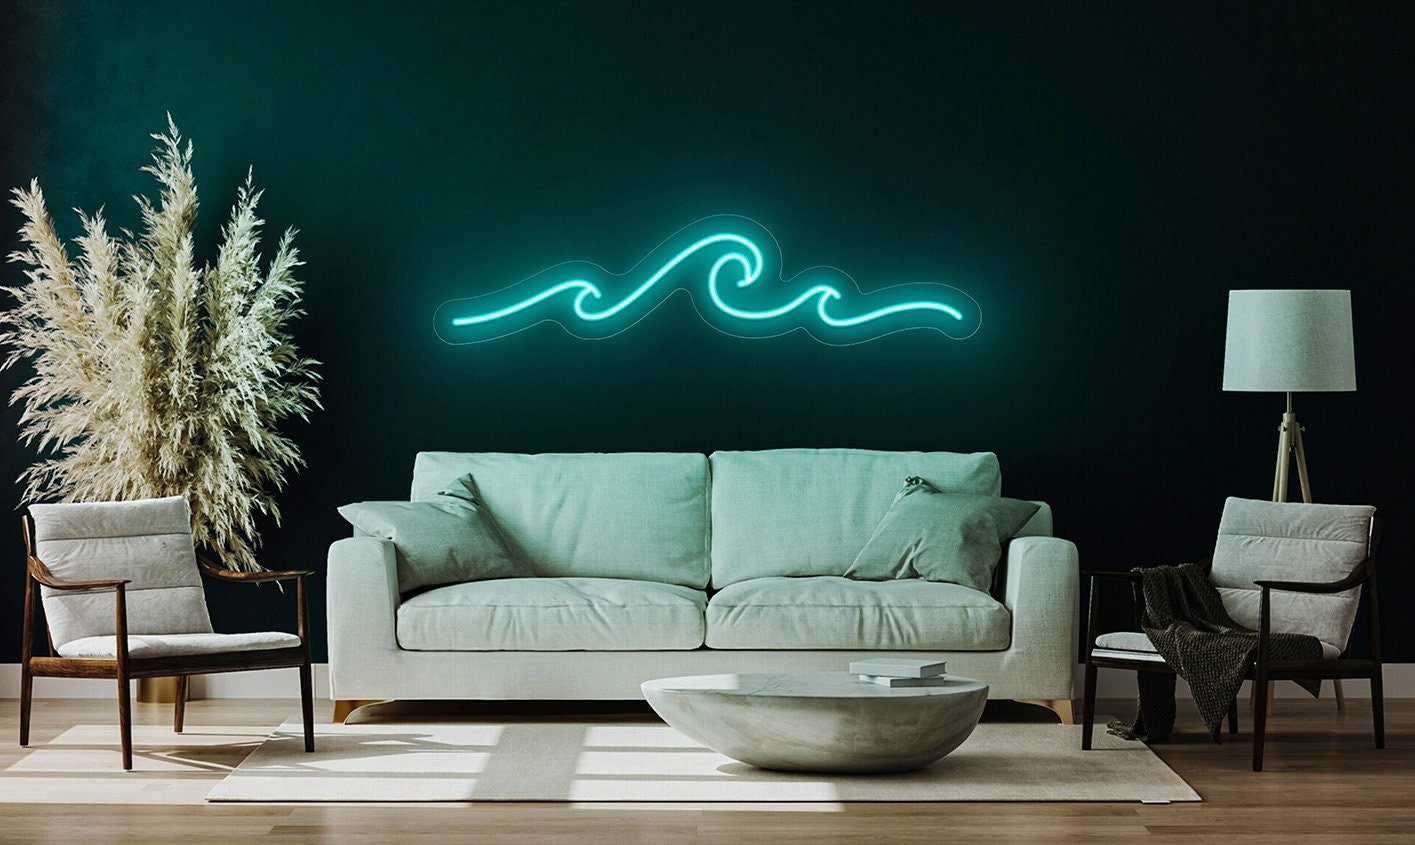 Neon sign battery operated - .de